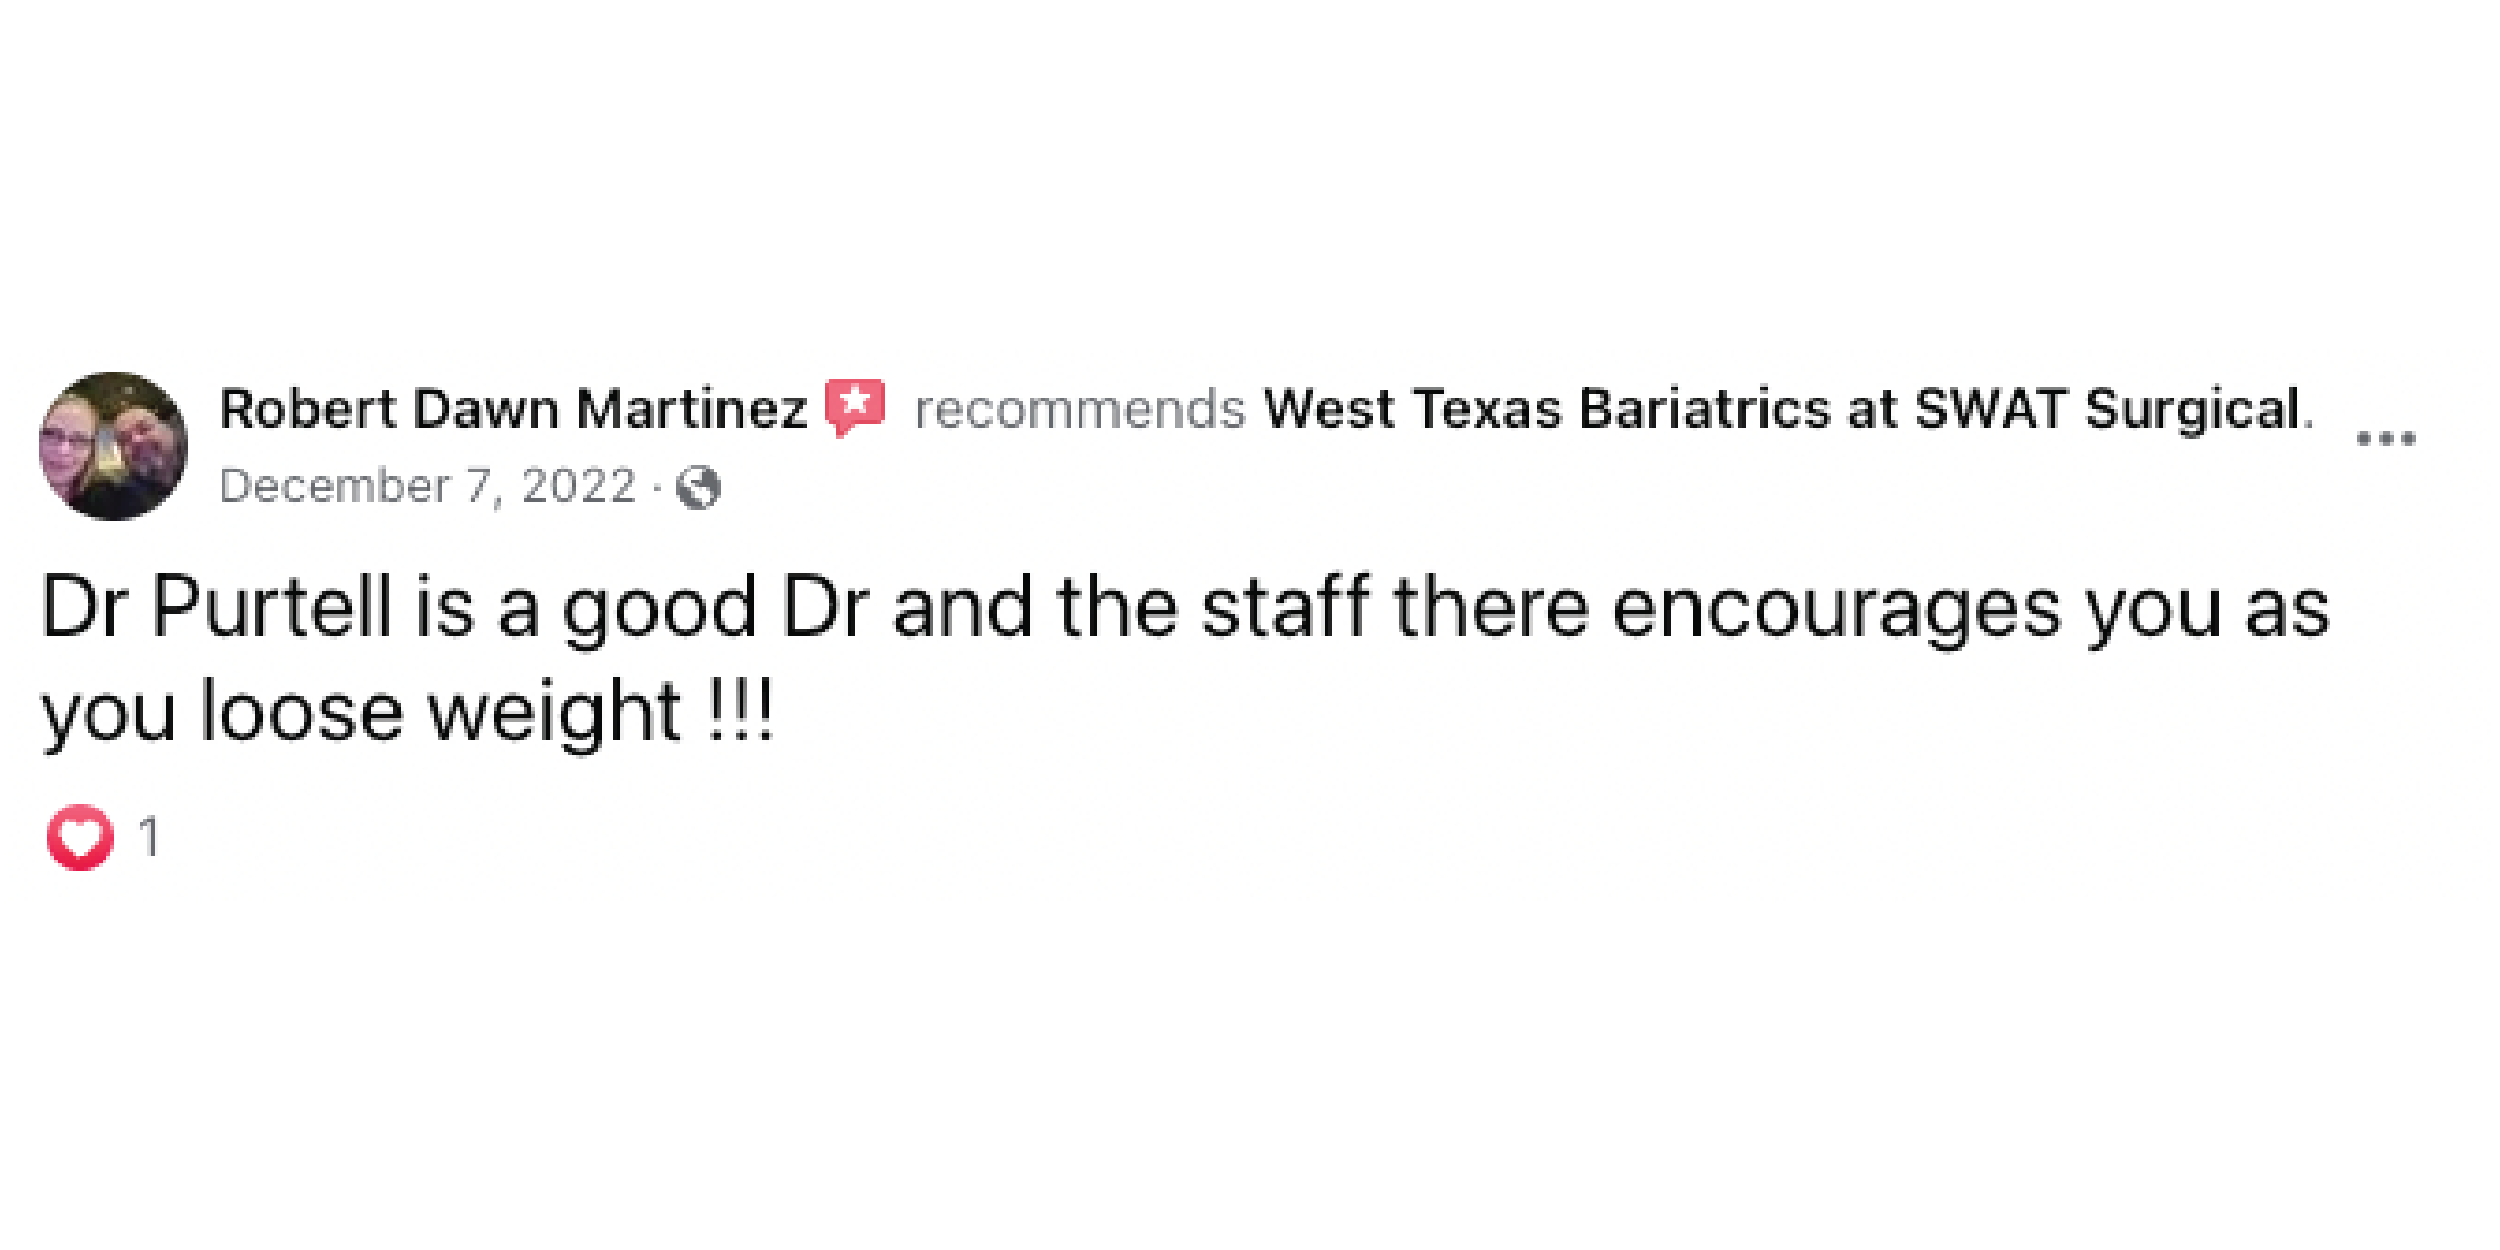 Patients' review of their bariatric surgery at West Texas Bariatrics